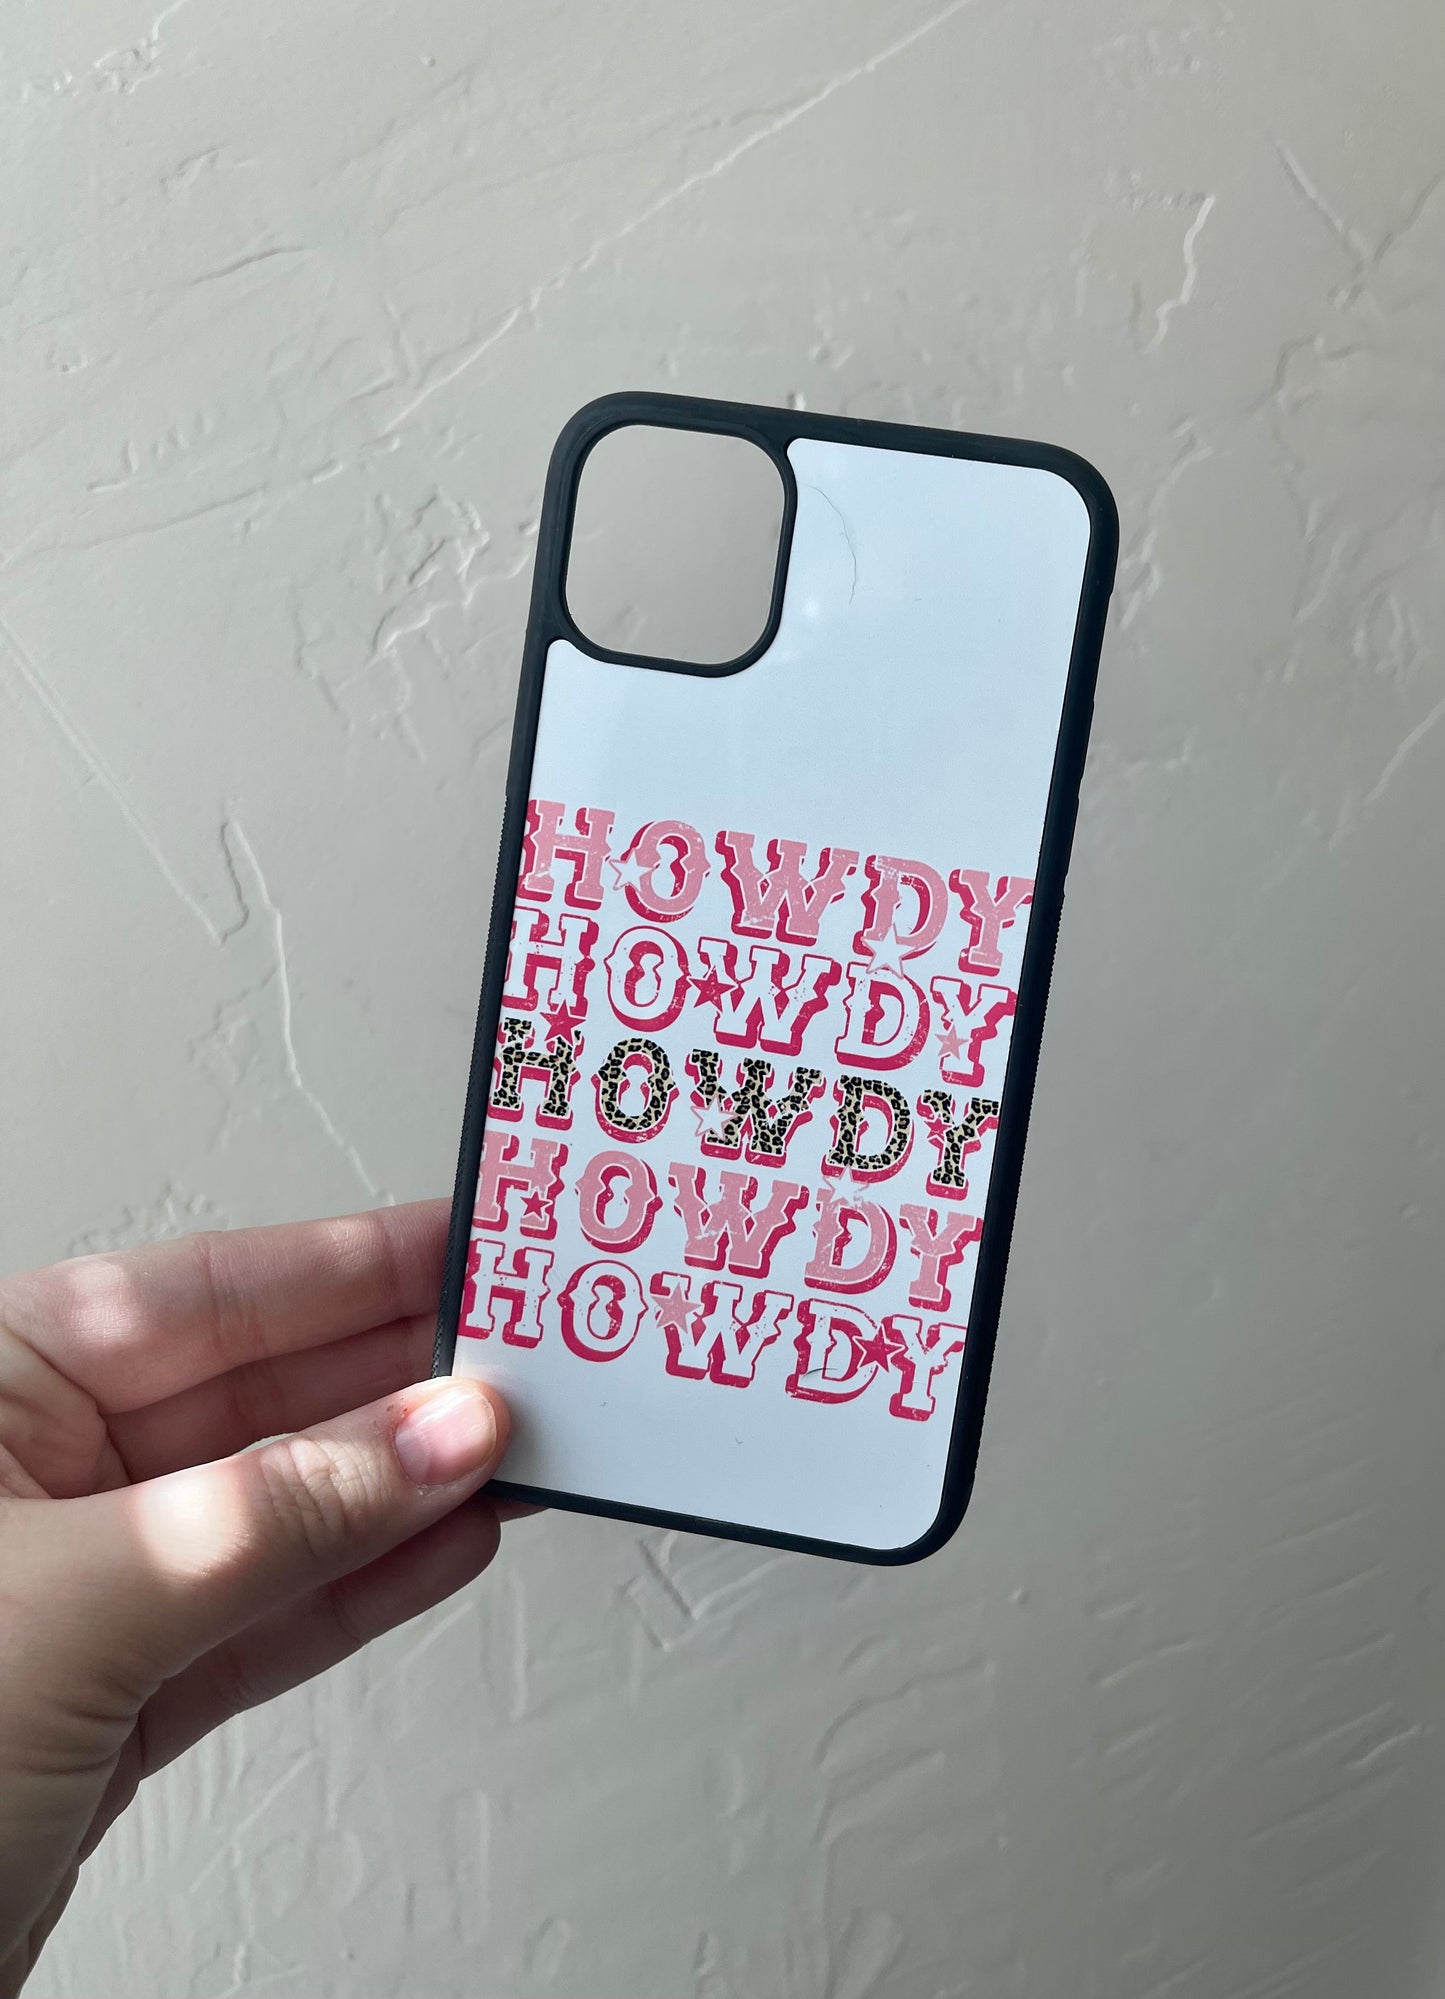 Stacked Howdy Phone Case